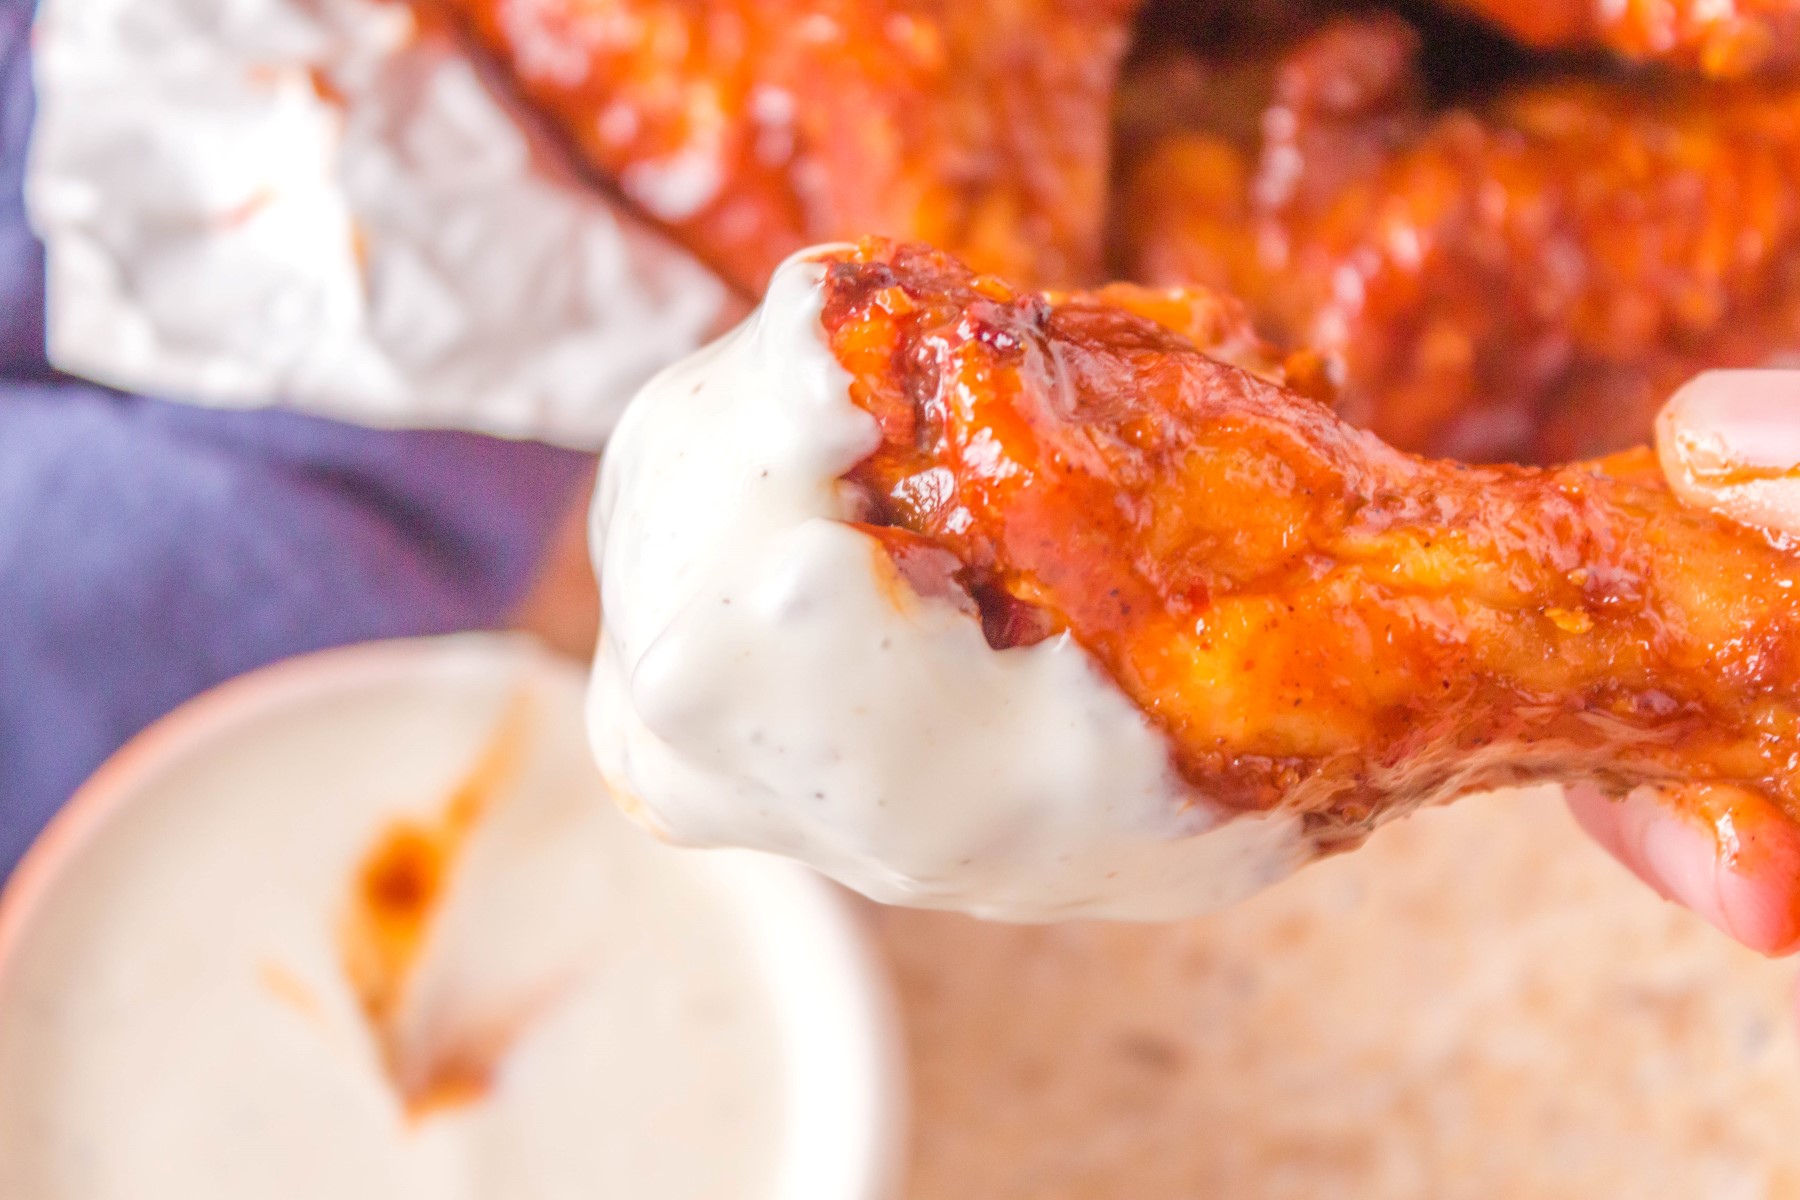 Crispy BBQ chicken wing covered in sauce and dipped in a ranch dressing.